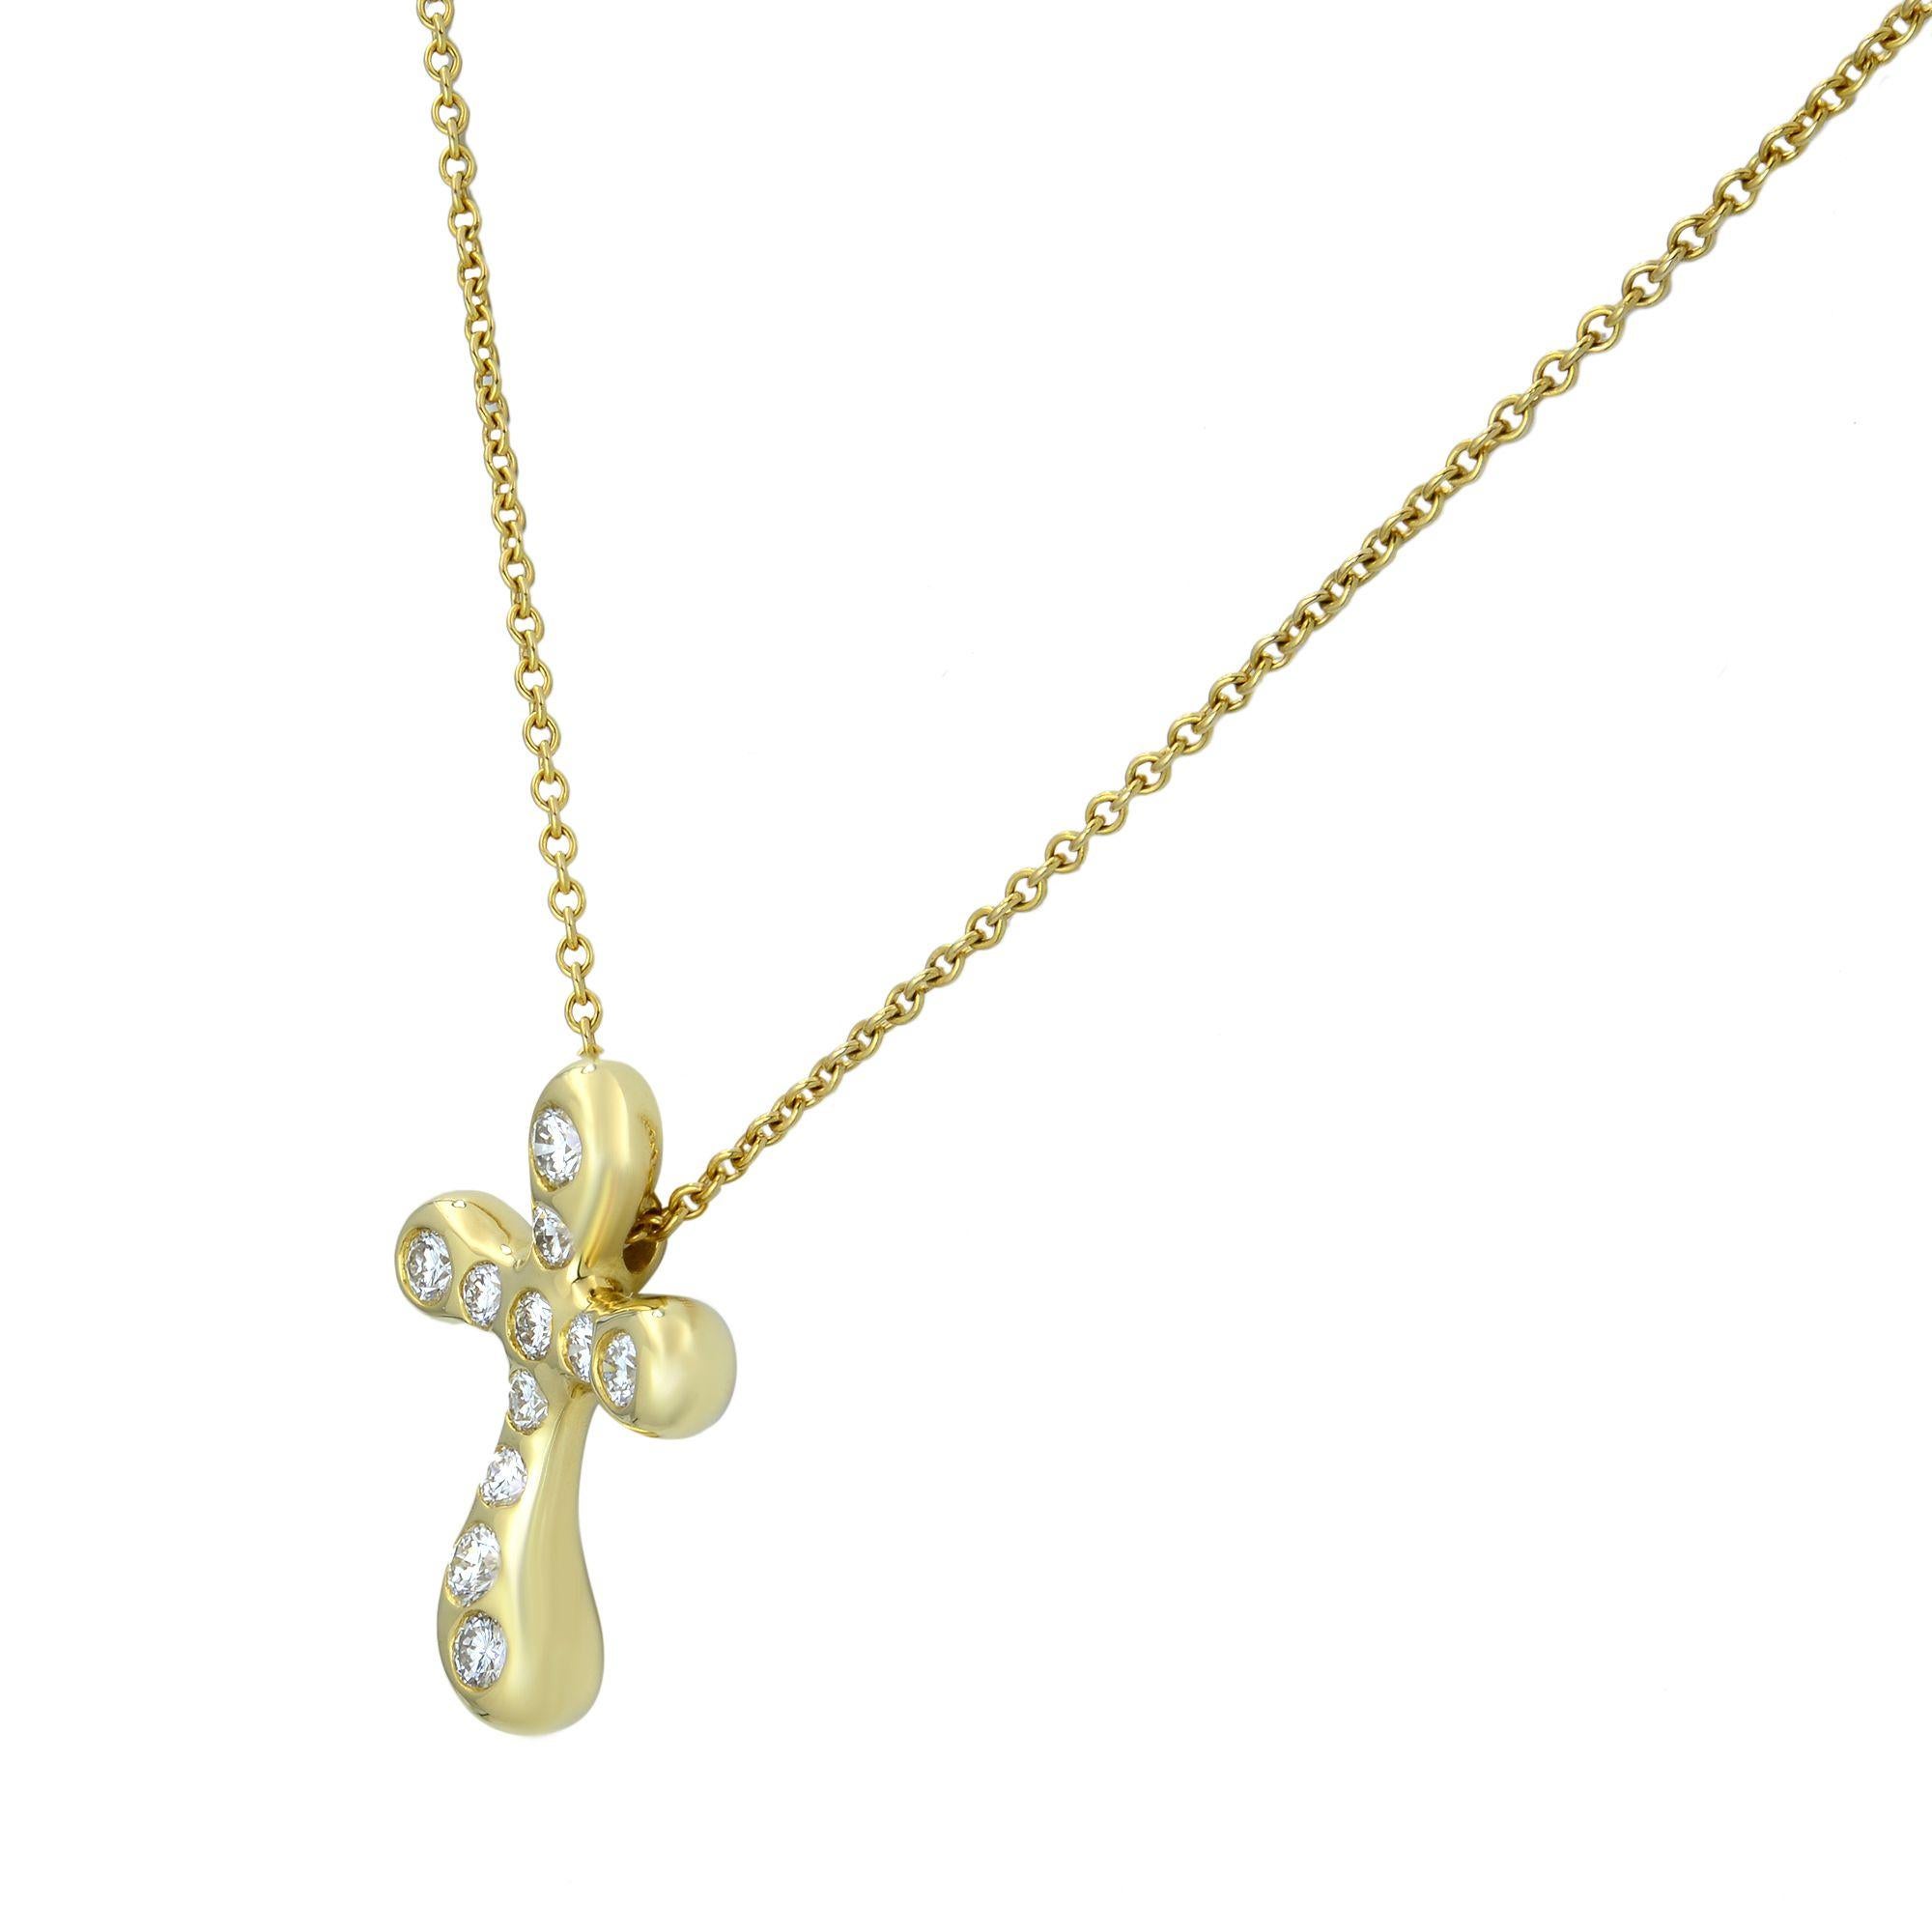 Tiffany & Co Elsa Peretti cross pendant in 18k yellow gold. Bezel set with 0.25 carat of round brilliant cut diamonds. Original designs copyrighted by Elsa Peretti. Cross size: 18.50mm x 13.50mm. Chain length: 16 inches. great pre-owned condition.